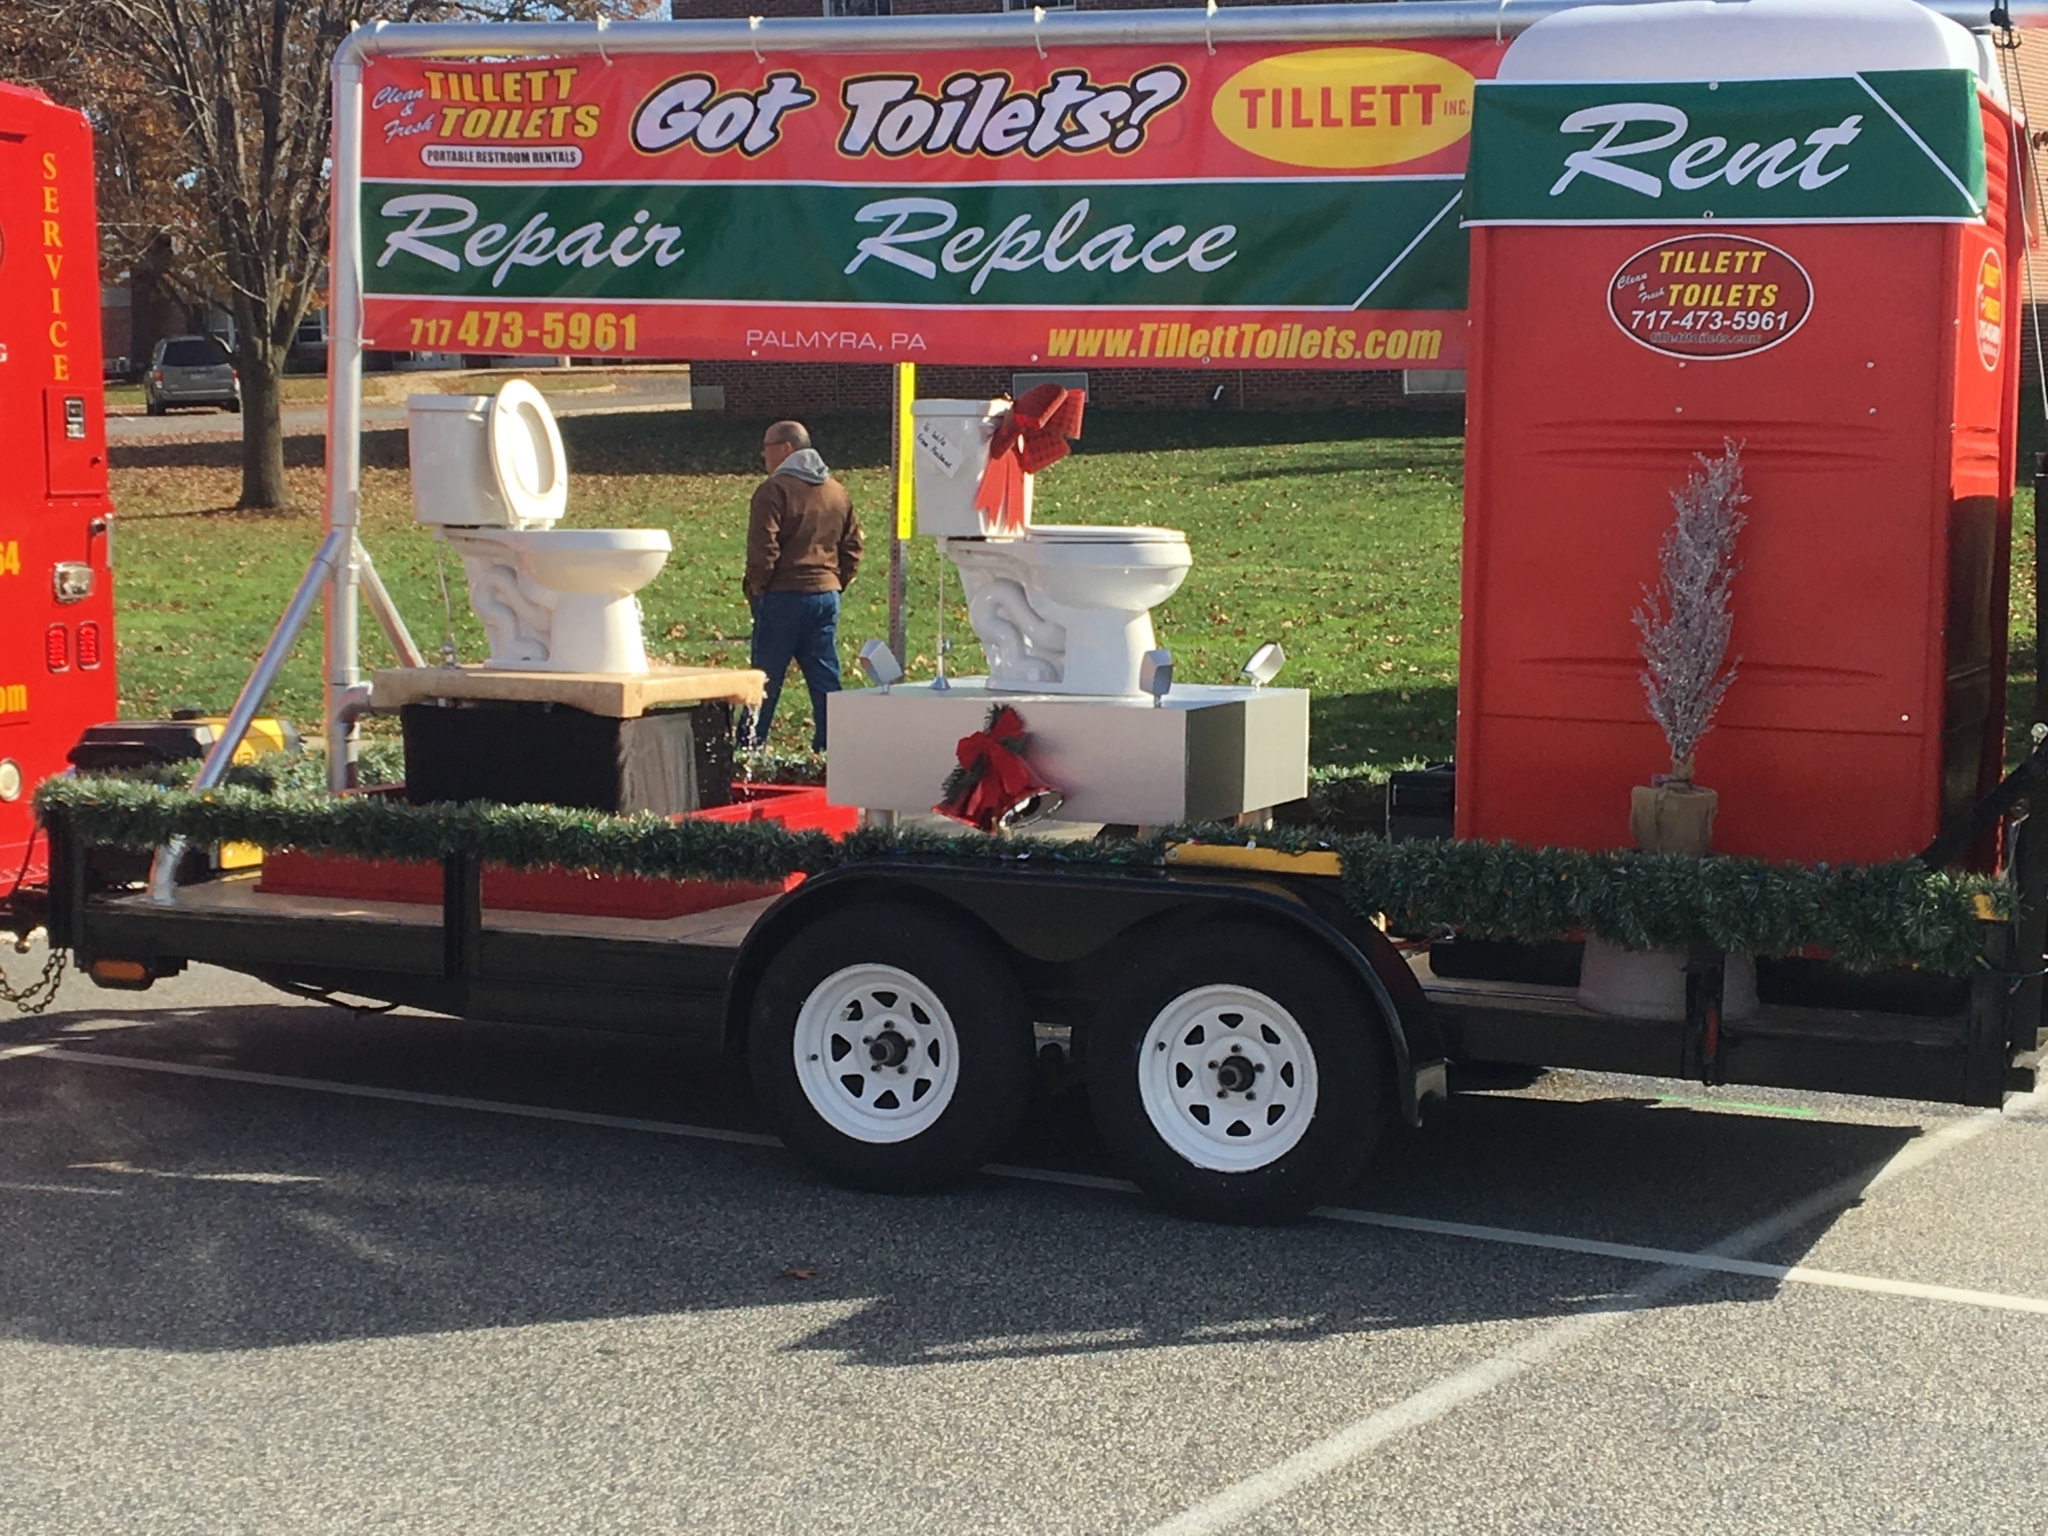 Another component of Tillett Toilets' parade participation is a float advertising services.